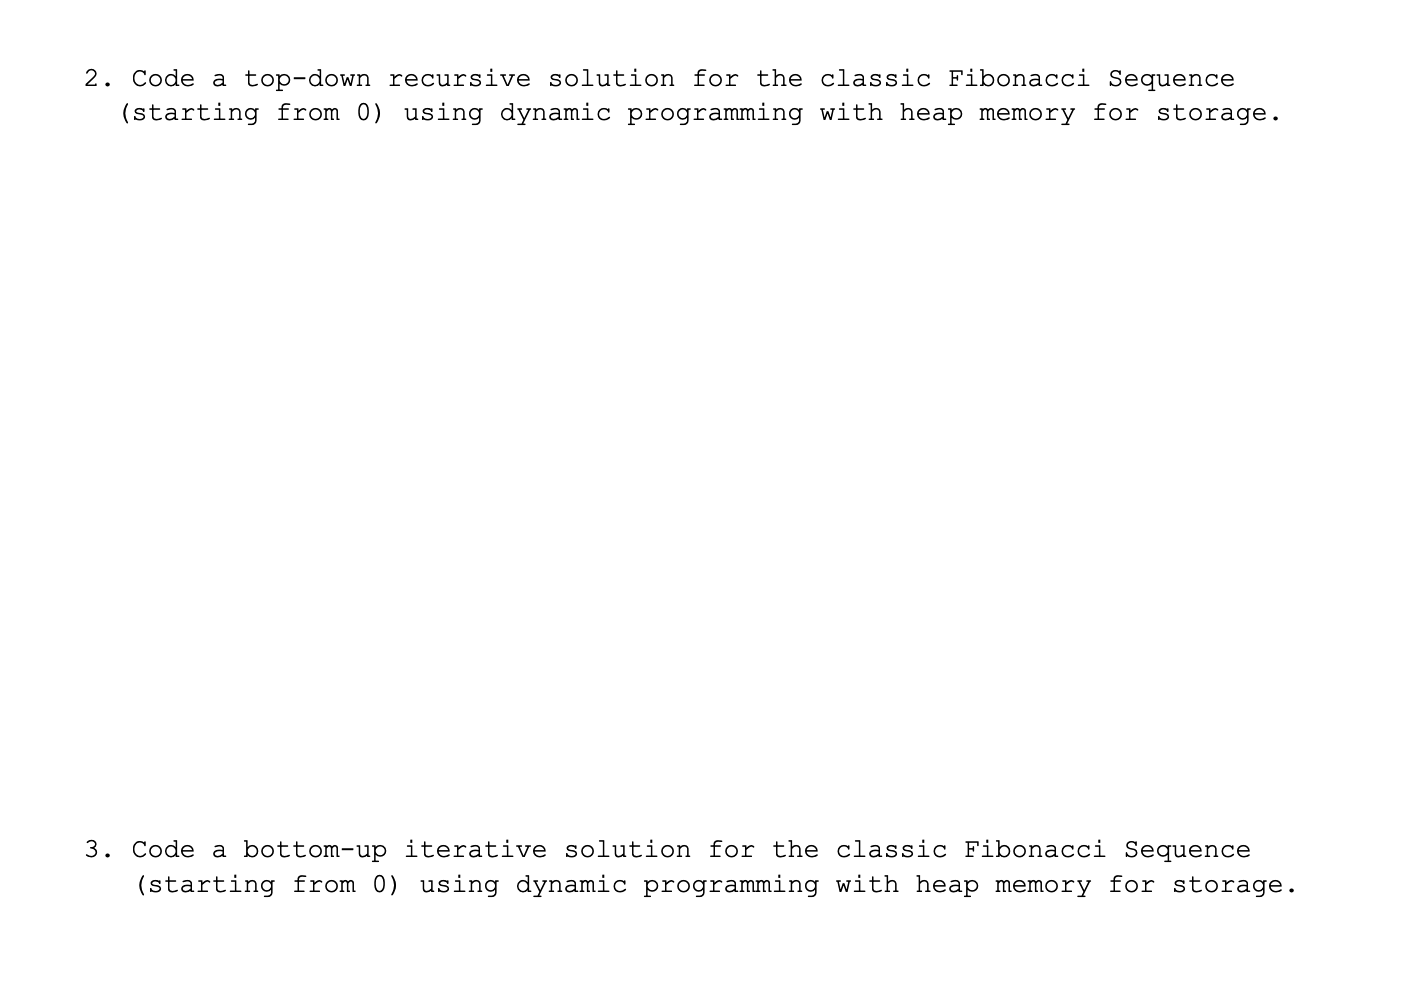 2. Code a top-down recursive solution for the classic Fibonacci Sequence
(starting from 0) using dynamic programming with heap memory for storage.
3. Code a bottom-up iterative solution for the classic Fibonacci Sequence
(starting from 0) using dynamic programming with heap memory for storage.
